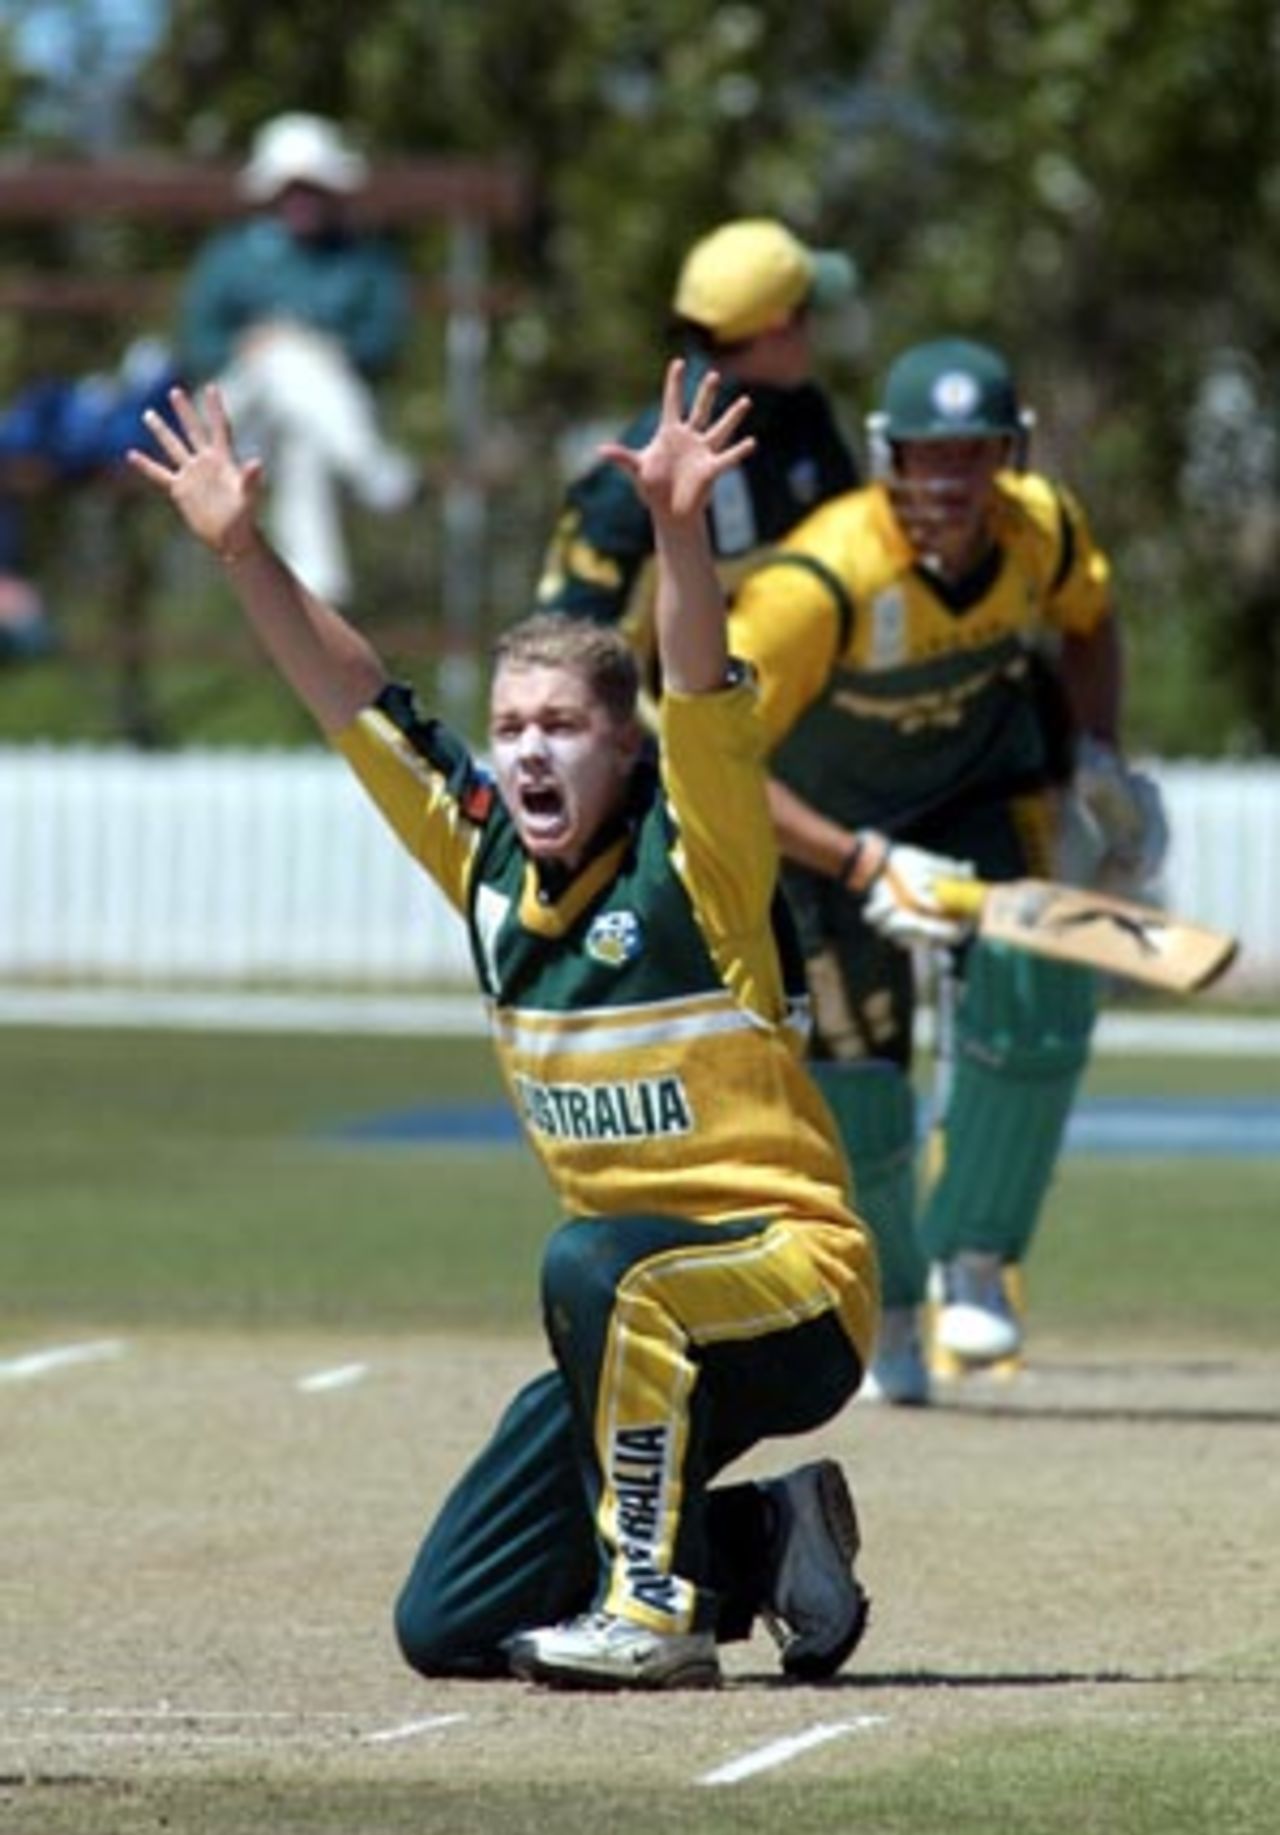 Australia Under-19 bowler Xavier Doherty unsuccessfully appeals for lbw during his spell of 2-26 from 10 overs. ICC Under-19 World Cup Super League Final: Australia Under-19s v South Africa Under-19s at Bert Sutcliffe Oval, Lincoln, 9 February 2002.